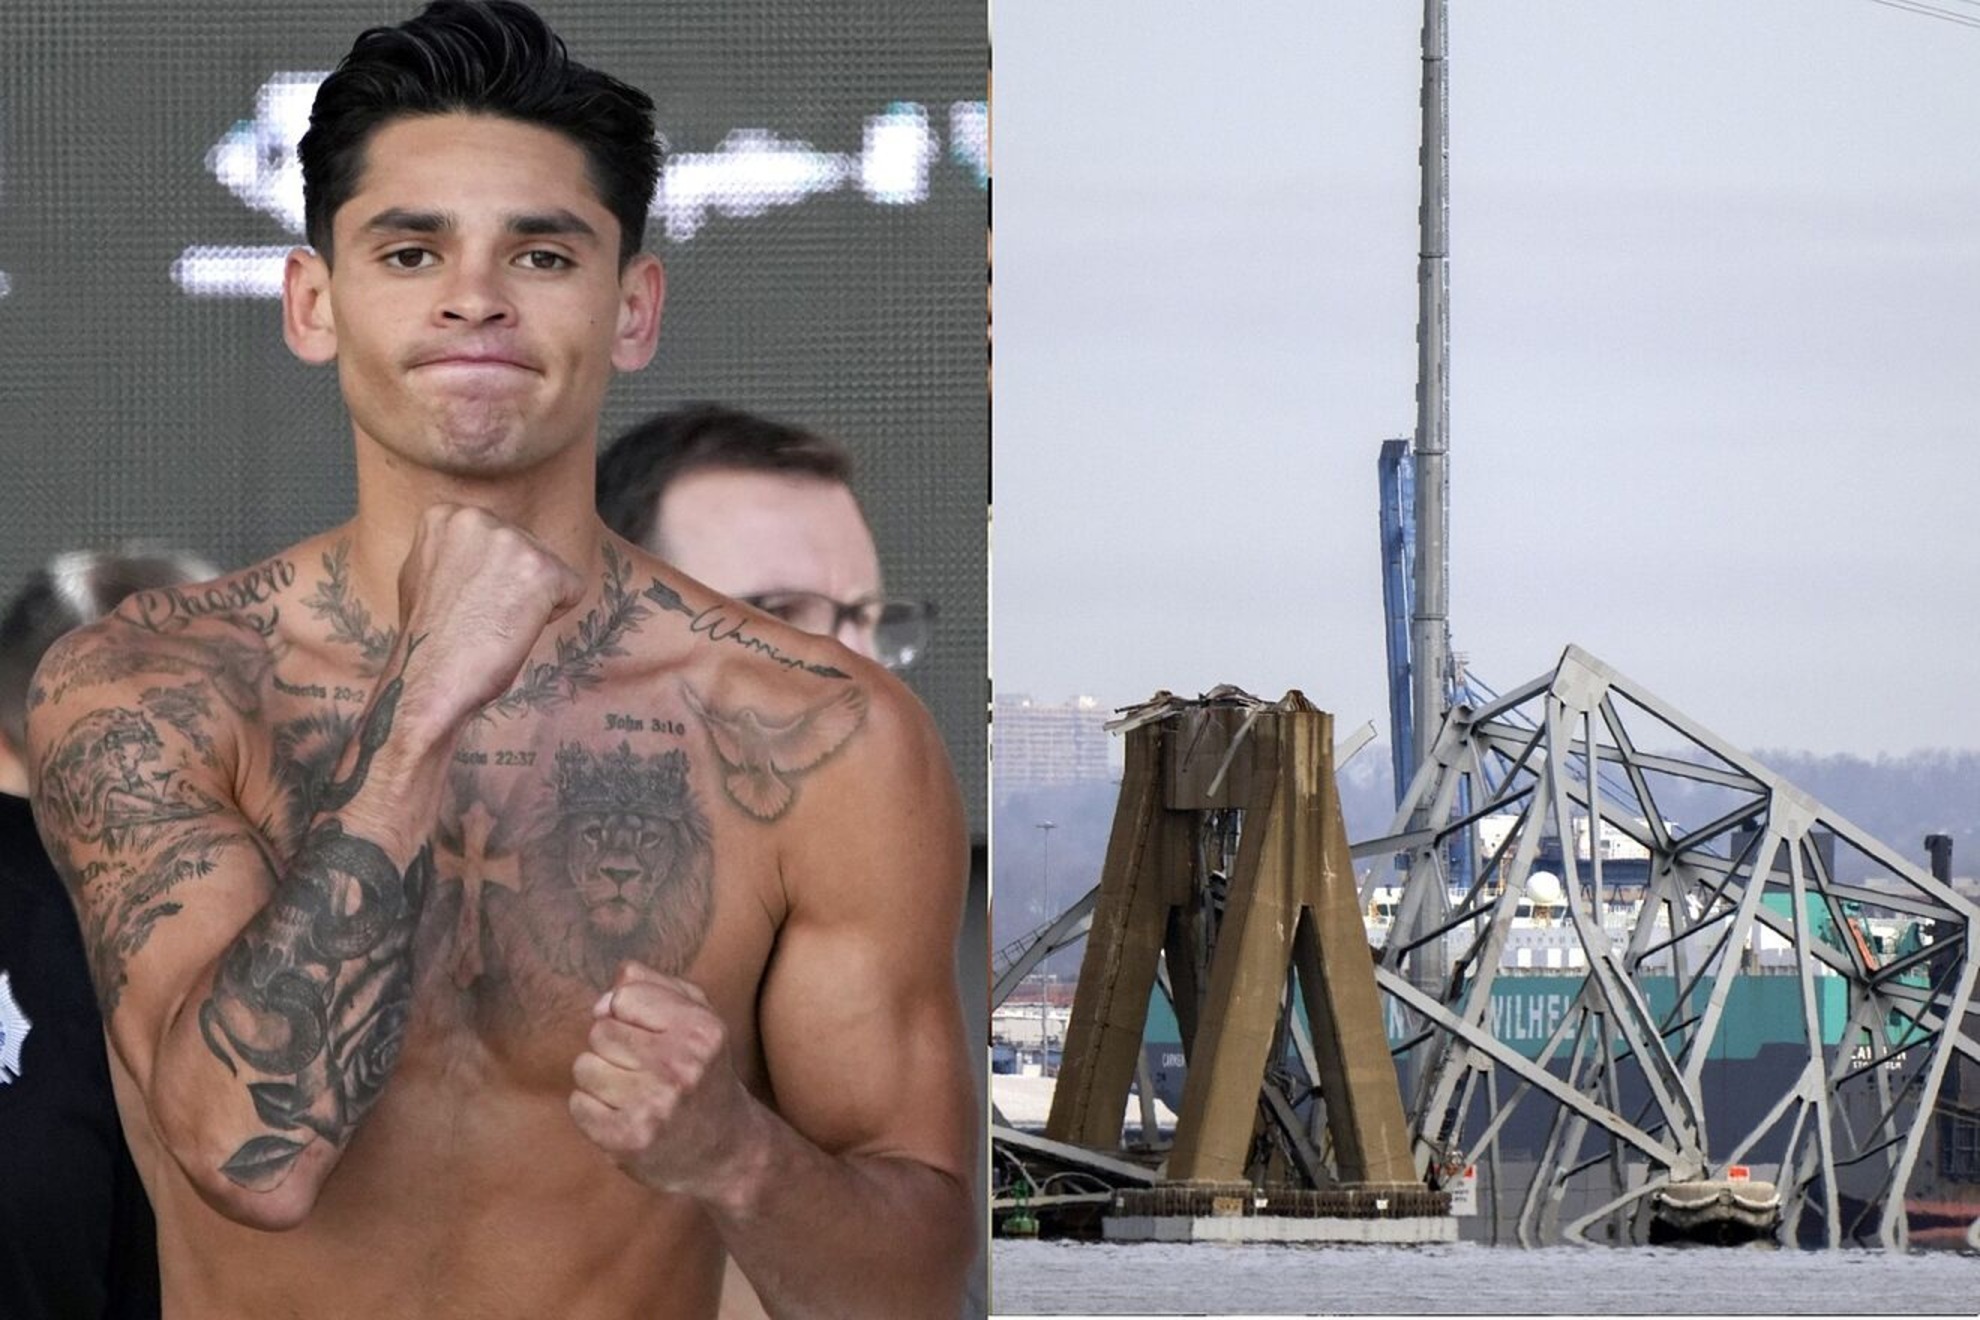 Ryan Garcia (left) and an image of the collapse of the Francis Scott Key Bridge (right).